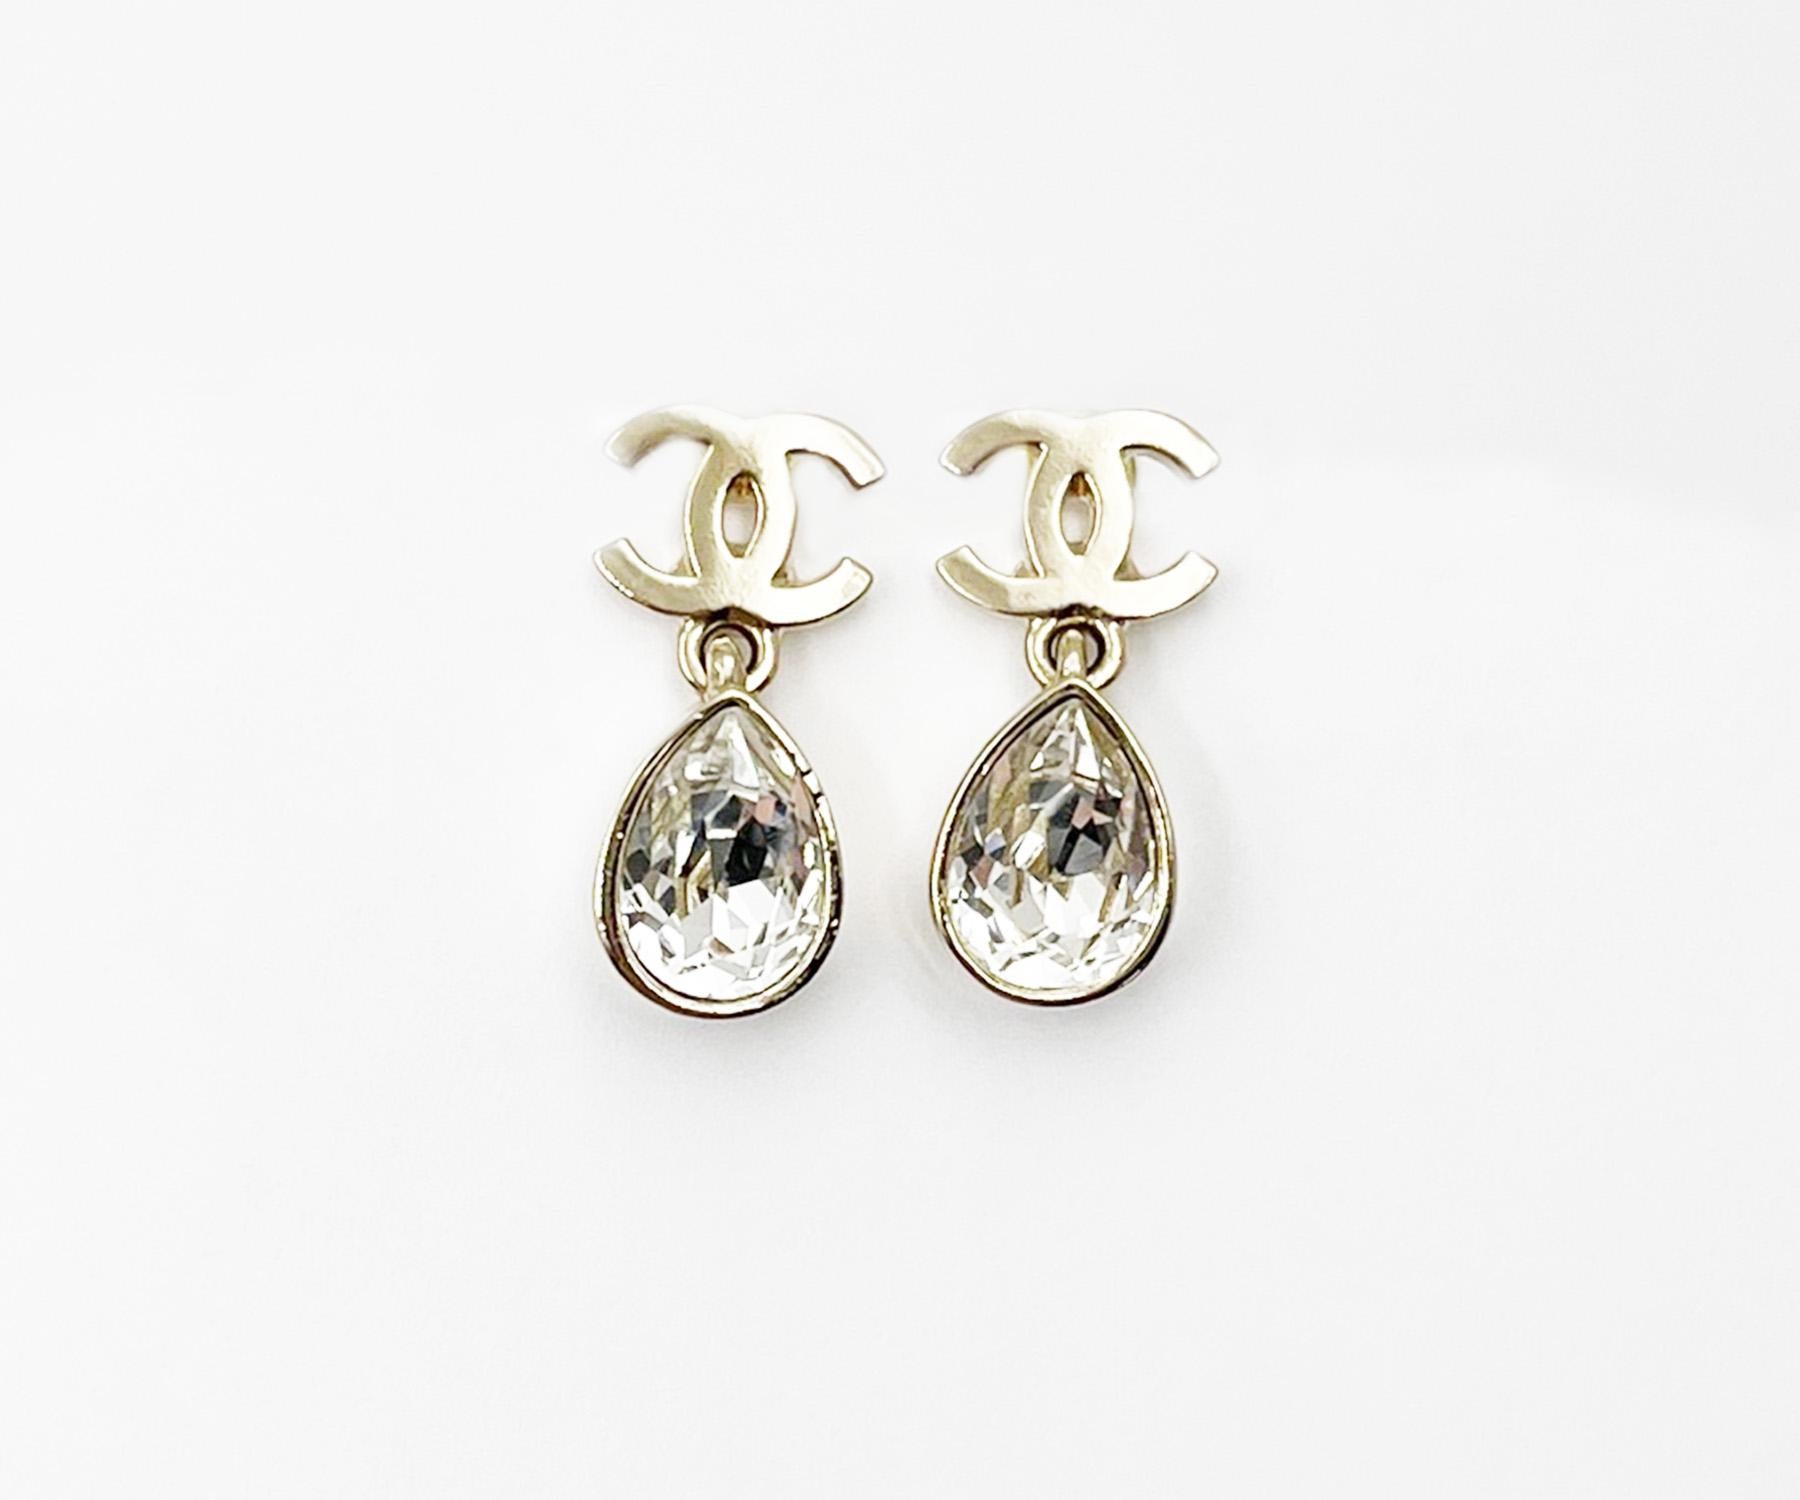 Chanel Gold CC Tear Drop Crystal Dangle Piercing Earrings

* Marked 22
* Made in France
*Comes with original box, pouch and booklet

-It is approximately 0.9